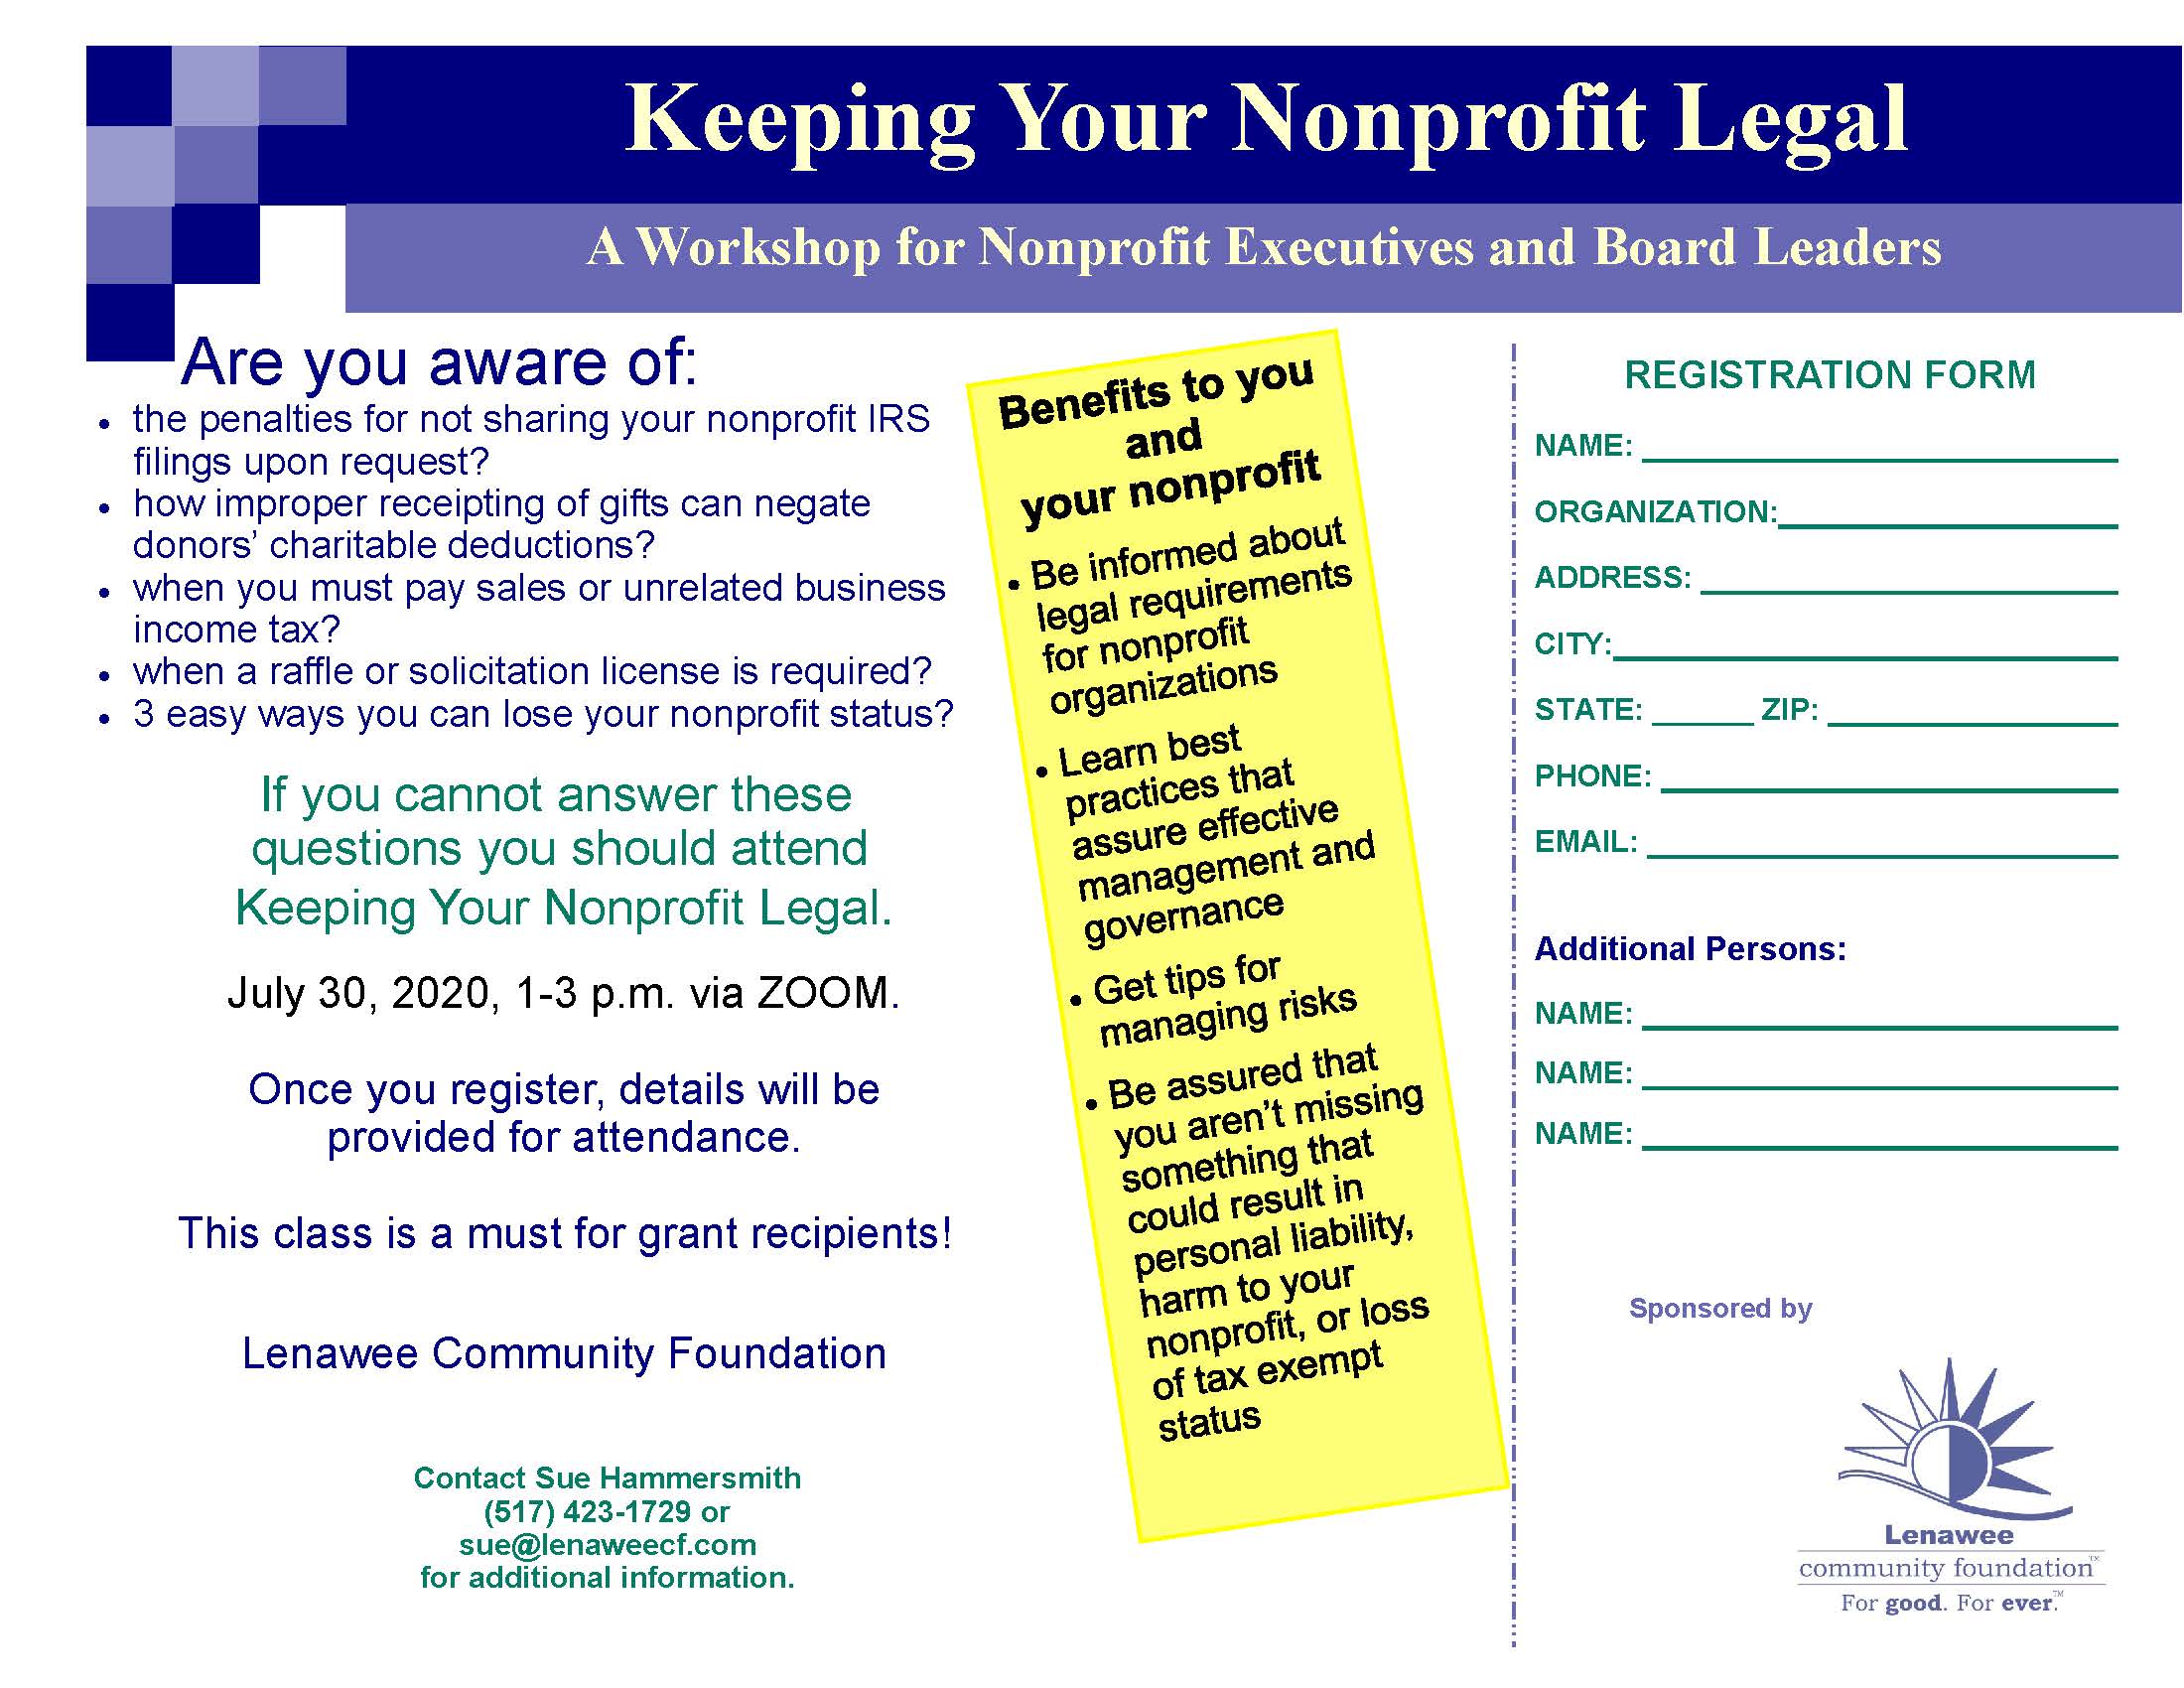 New Workshop – Keeping Your Nonprofit Legal 2020 from the Lenawee Community Foundation